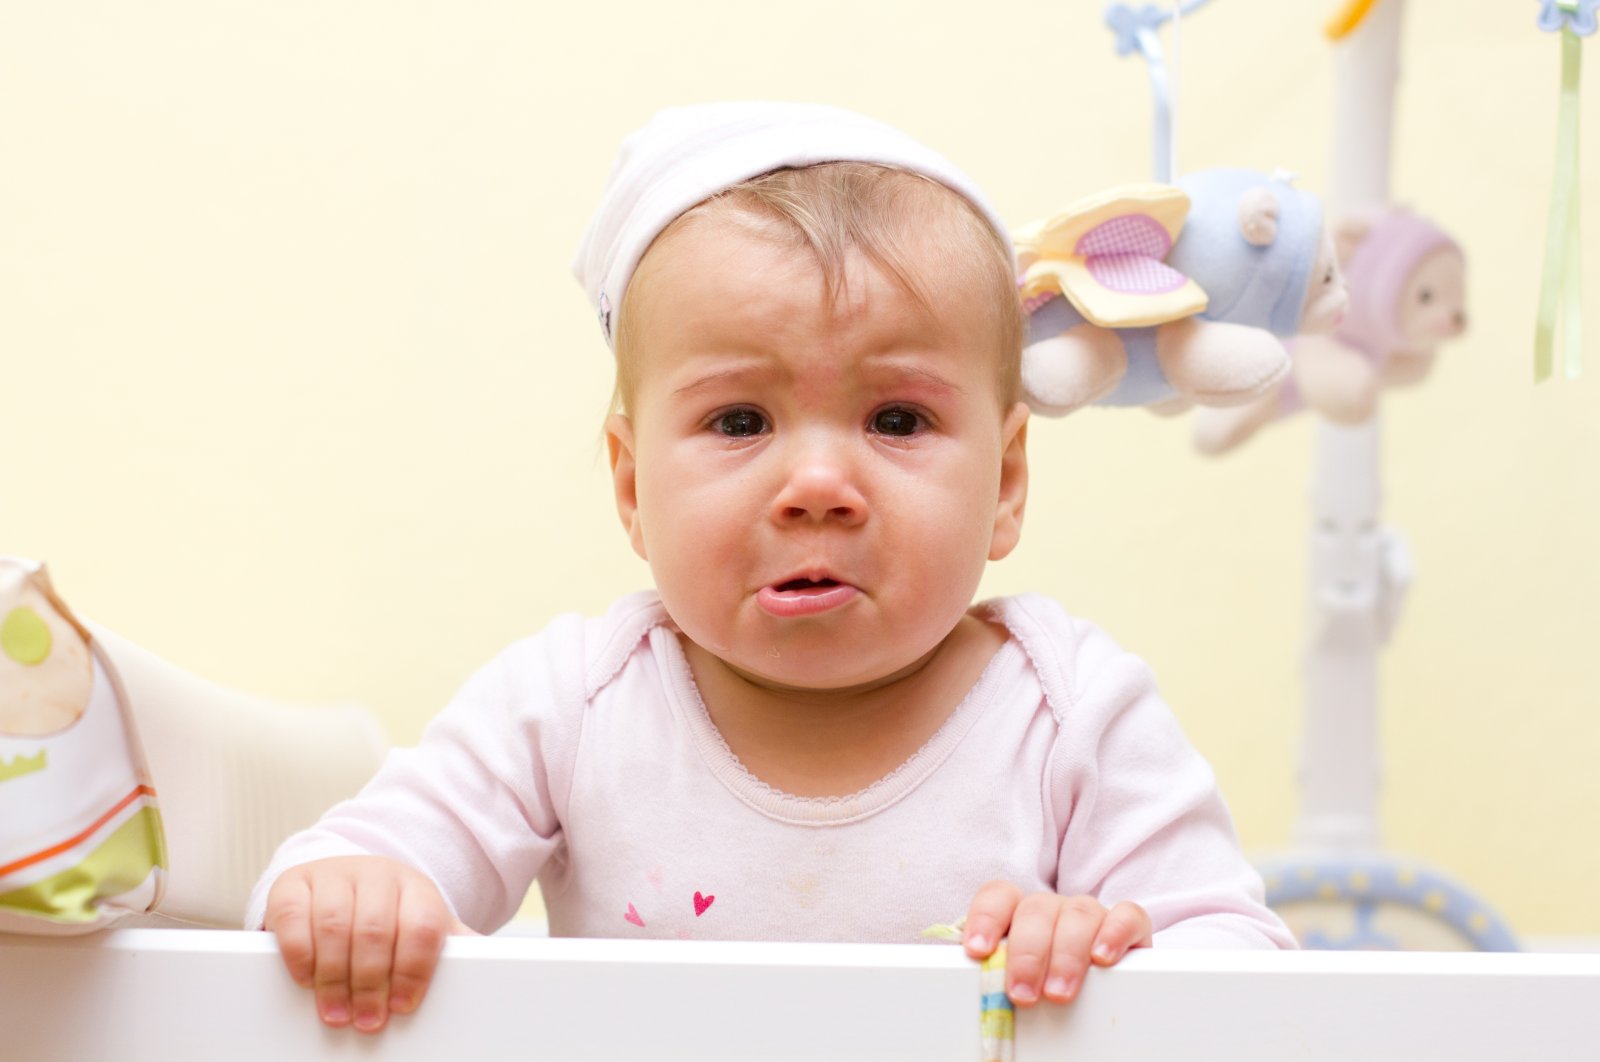 Science has perfected the answer to calming a crying baby according to a new study. (Shutterstock Photo)